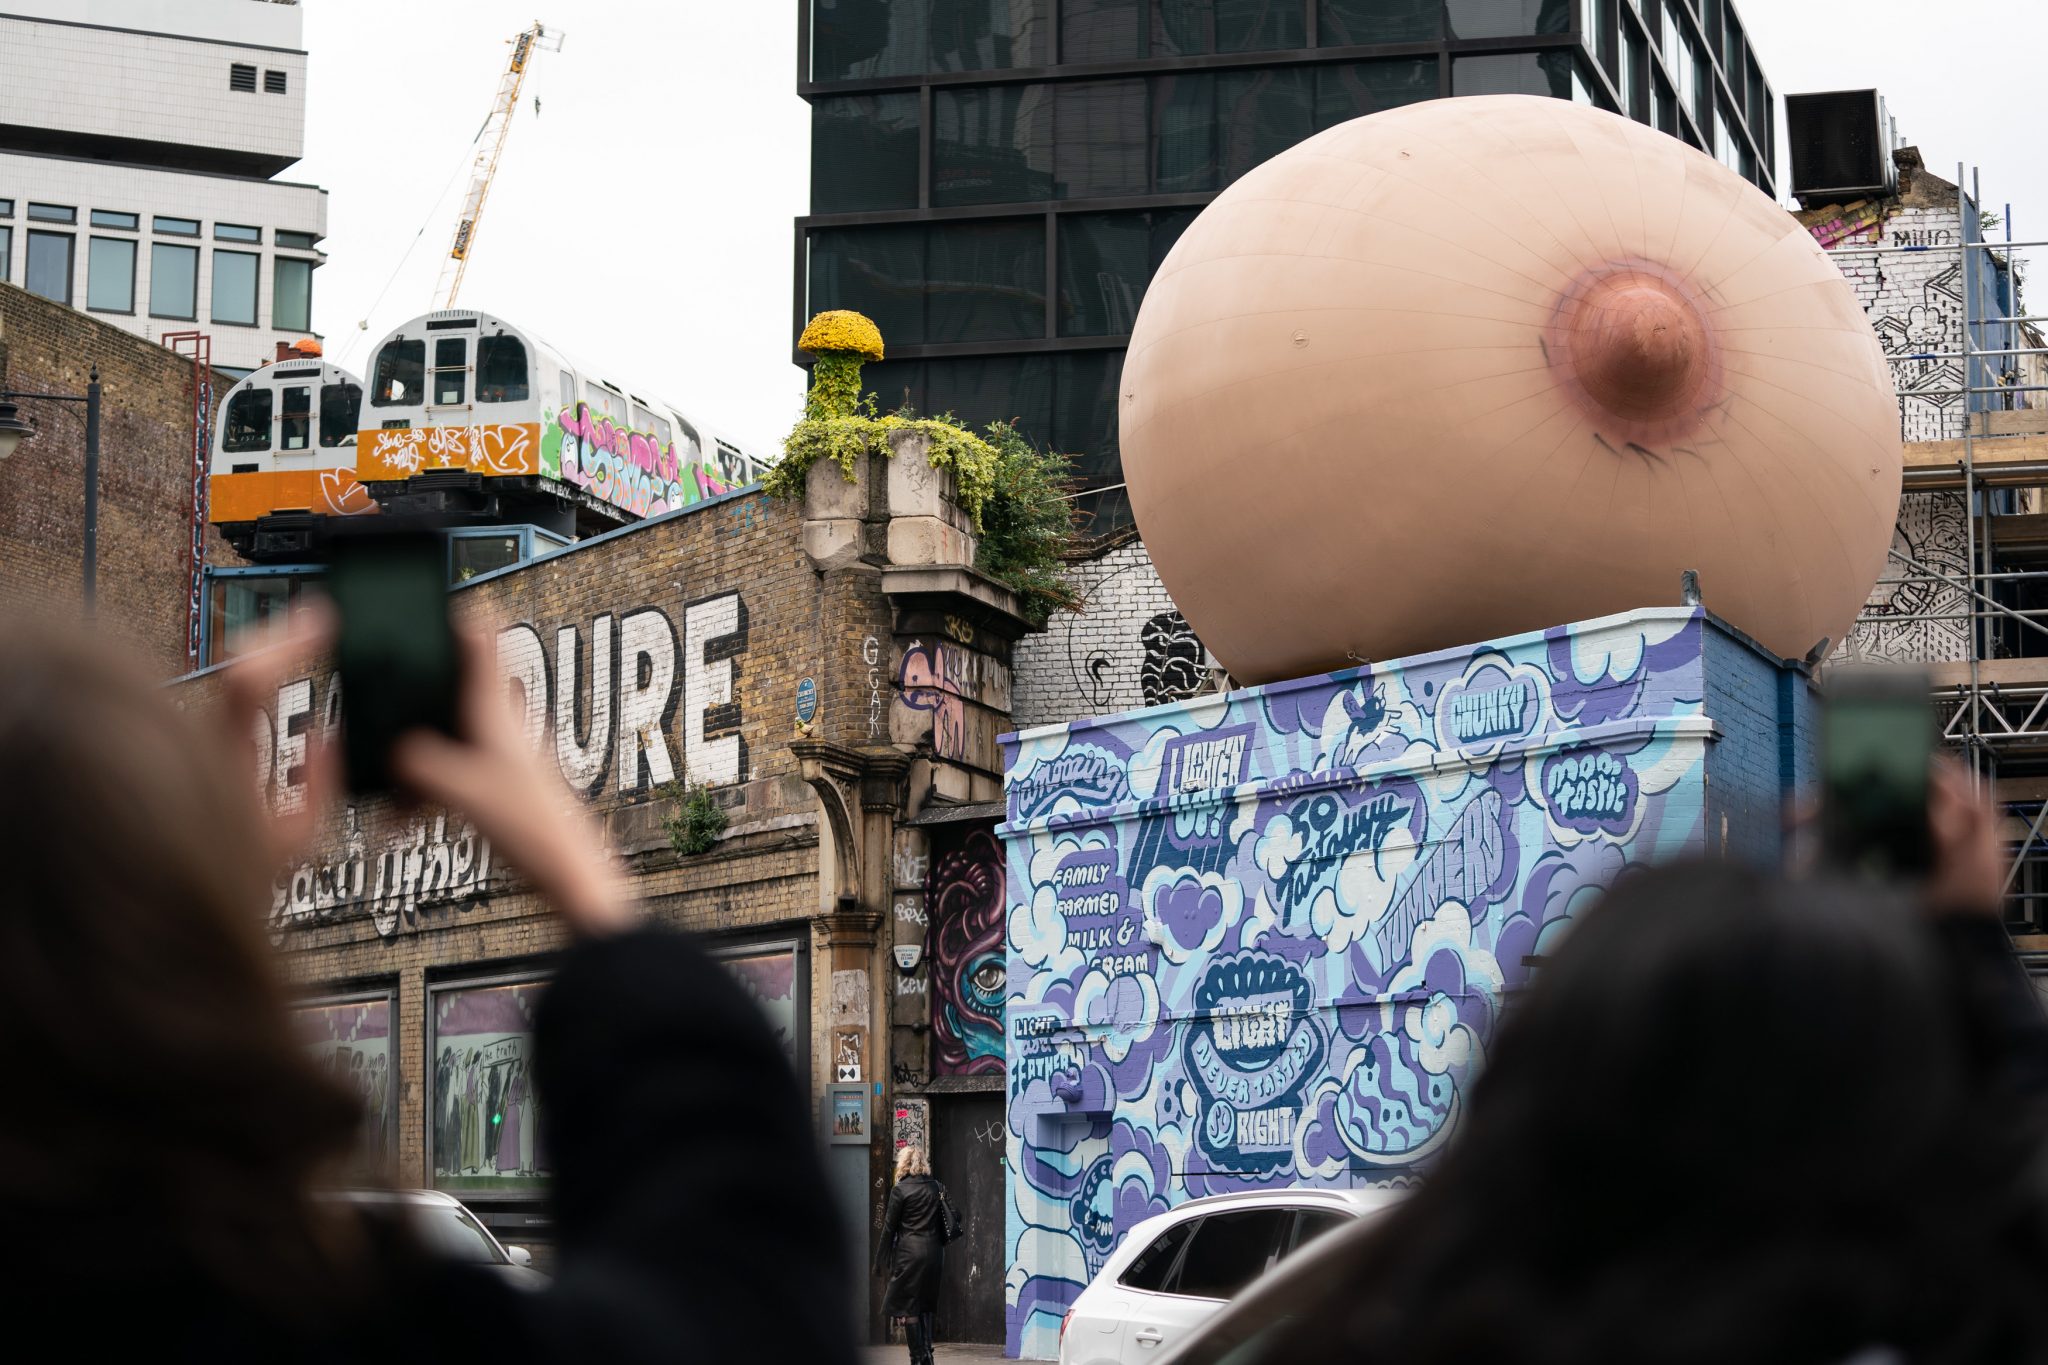 Photo of a giant breast on top of a roof in Shoreditch, which was part of a marketing stunt by femtech startup Elvie.